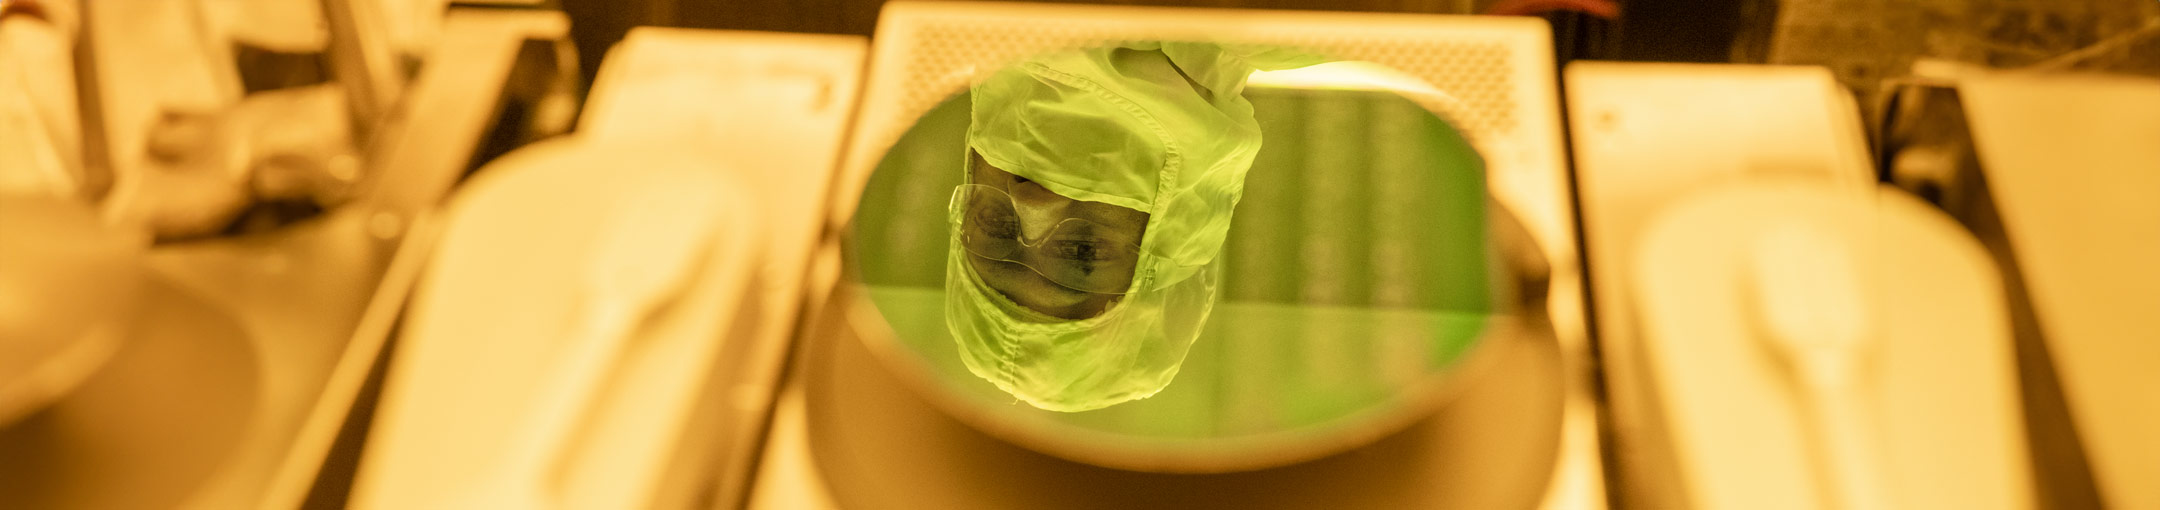 A student in a bunny suit and goggles is reflected in a wafer.